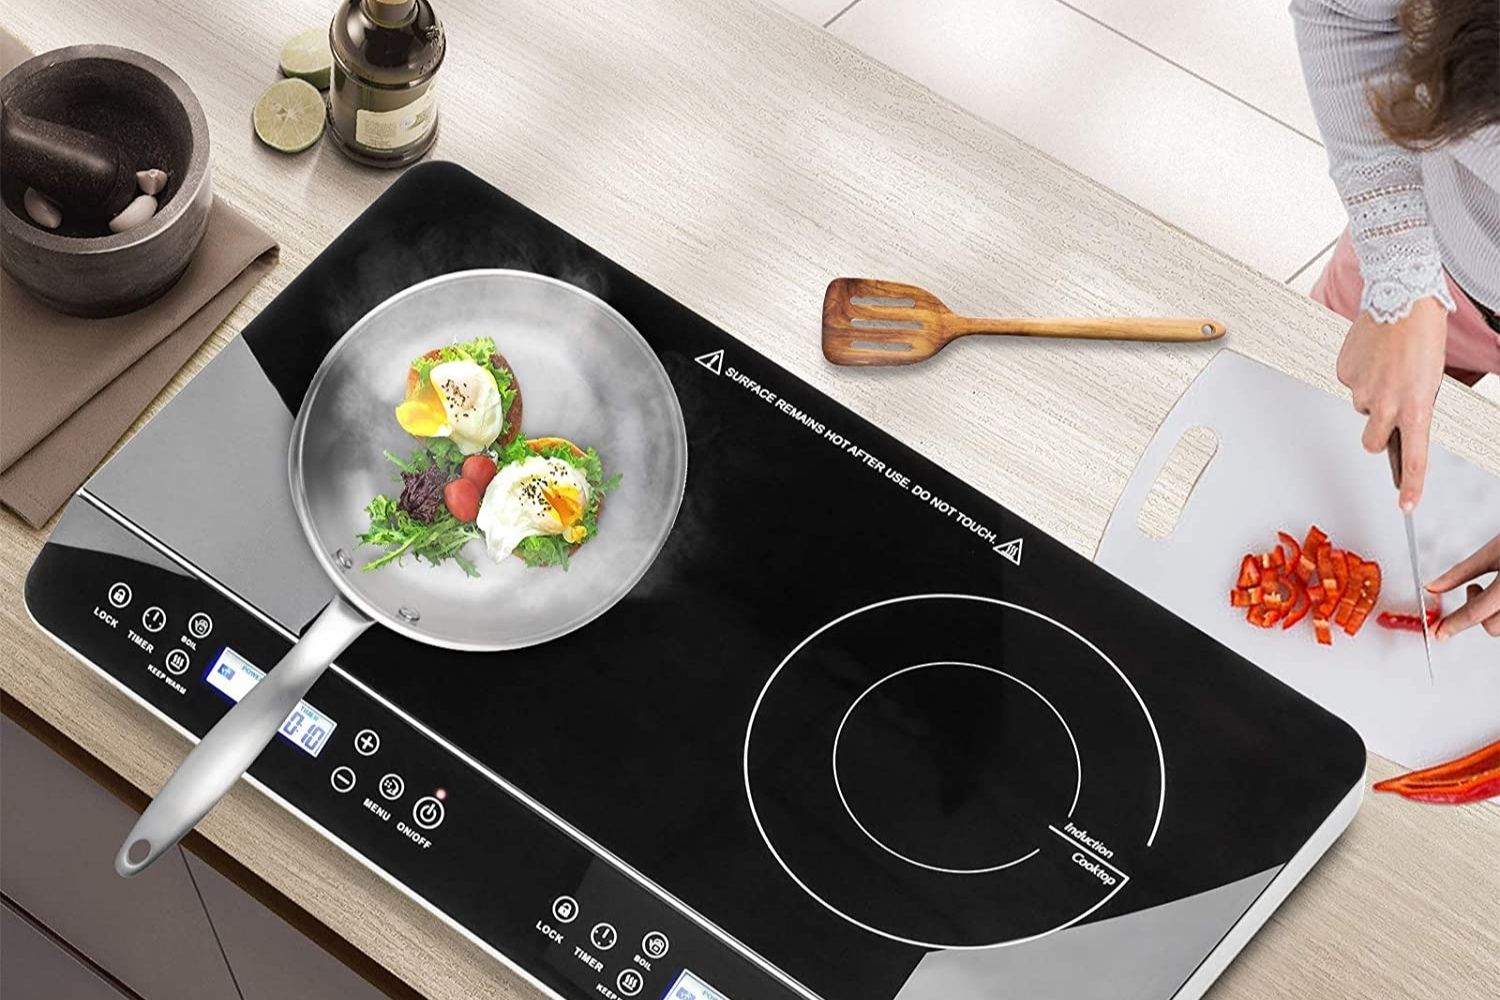 The best hot plate option on a kitchen counter with a pan on it cooking two eggs.